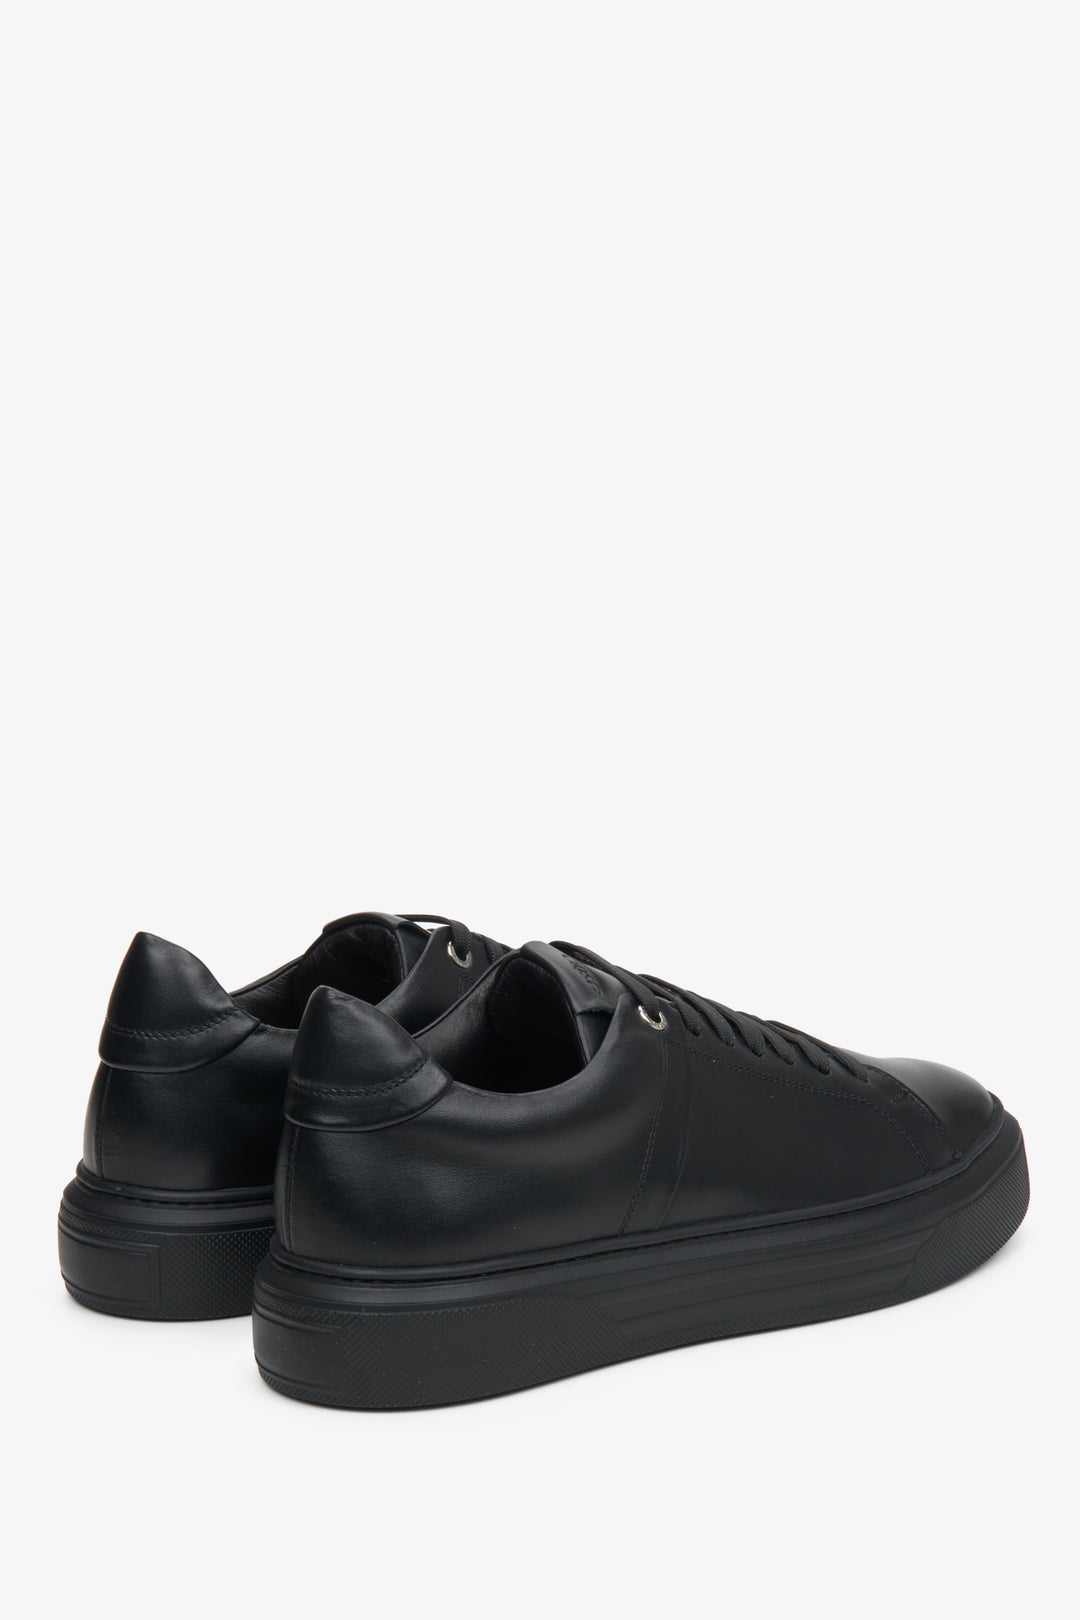 Black Estro men's sneakers with lacing - close-up on the heel and side line.